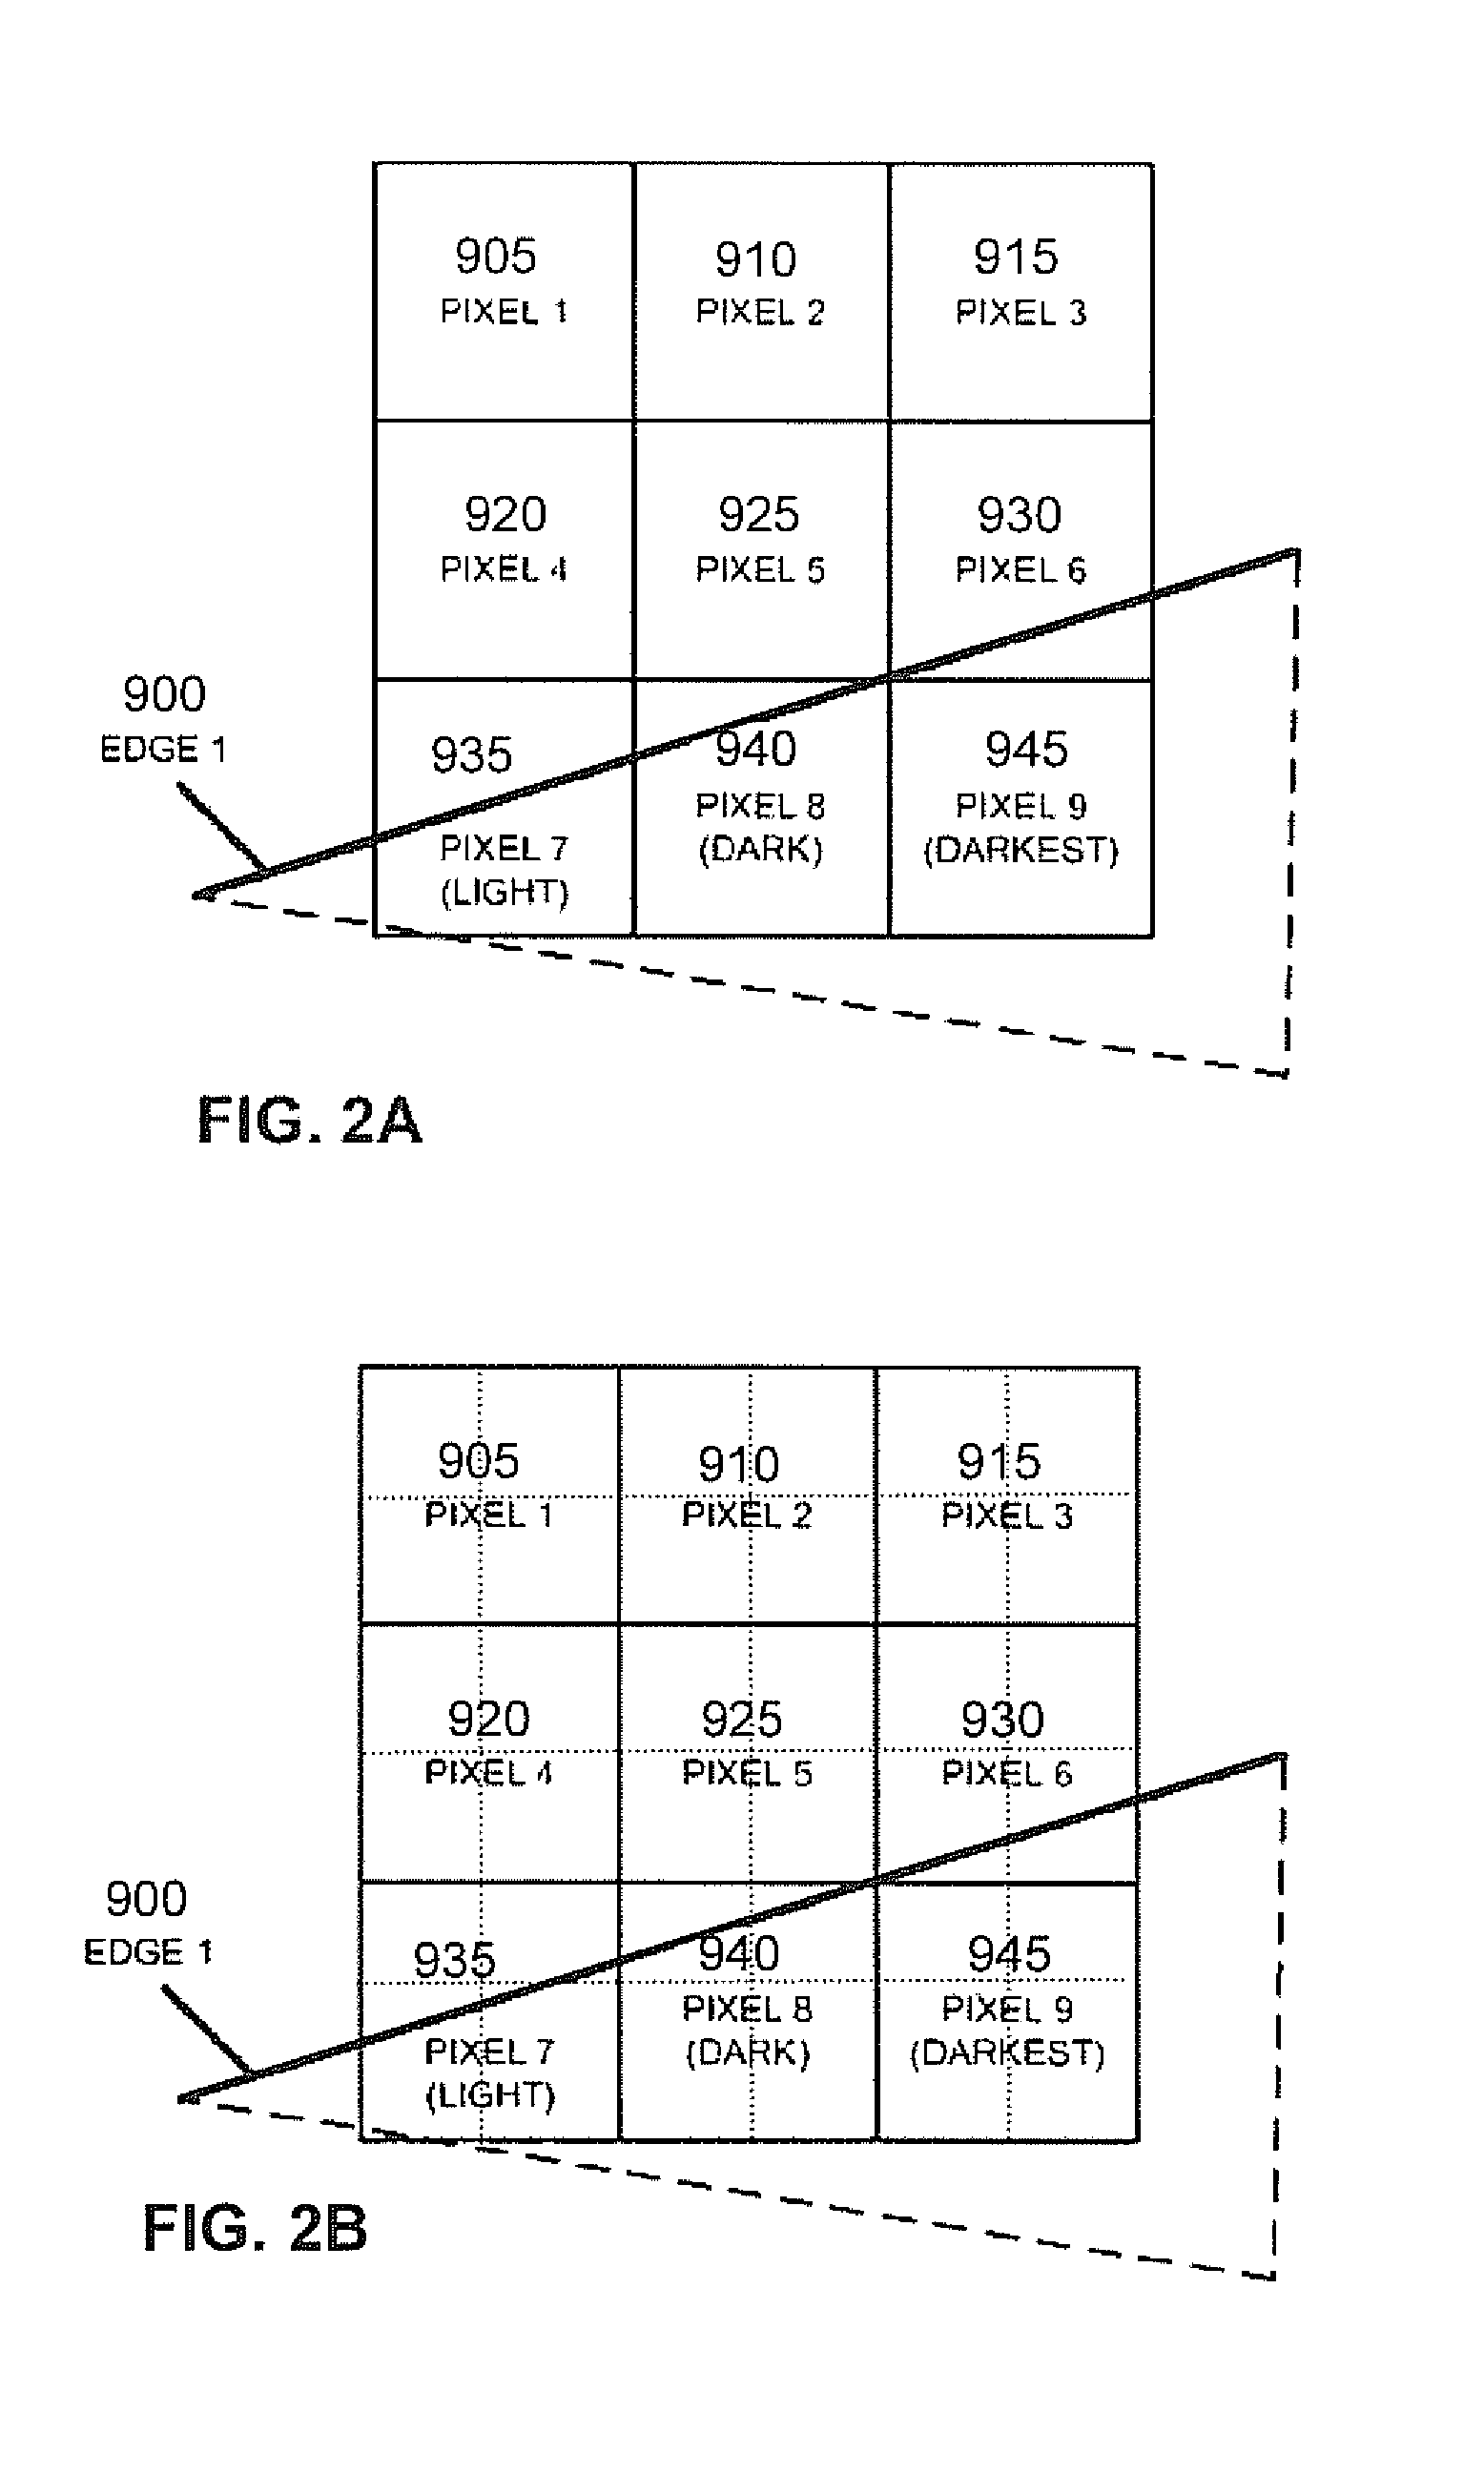 Alternate reduction ratios and threshold mechanisms for framebuffer compression